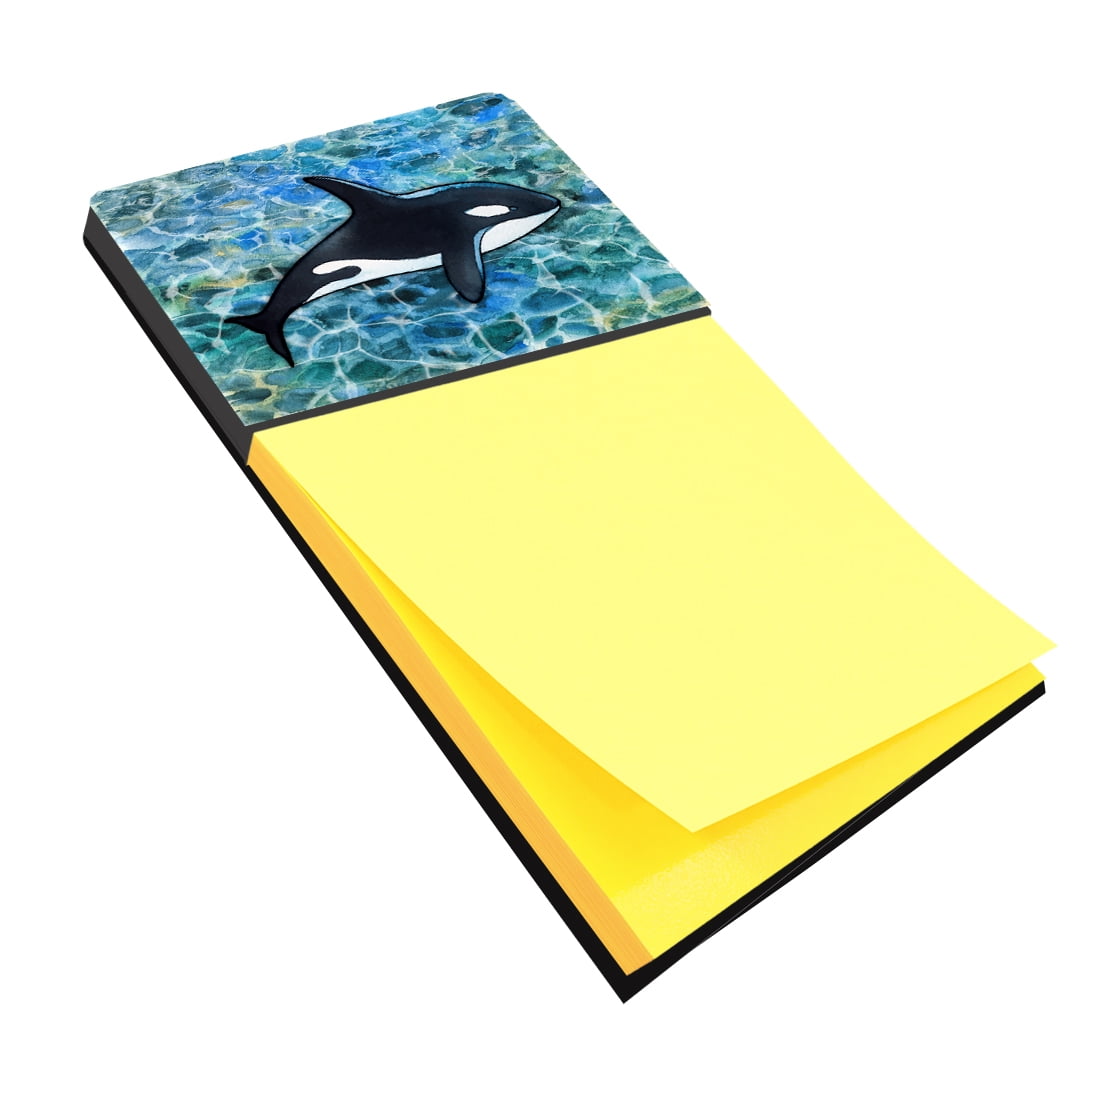 Bb5348sn Killer Whale Orca Sticky Note Holder